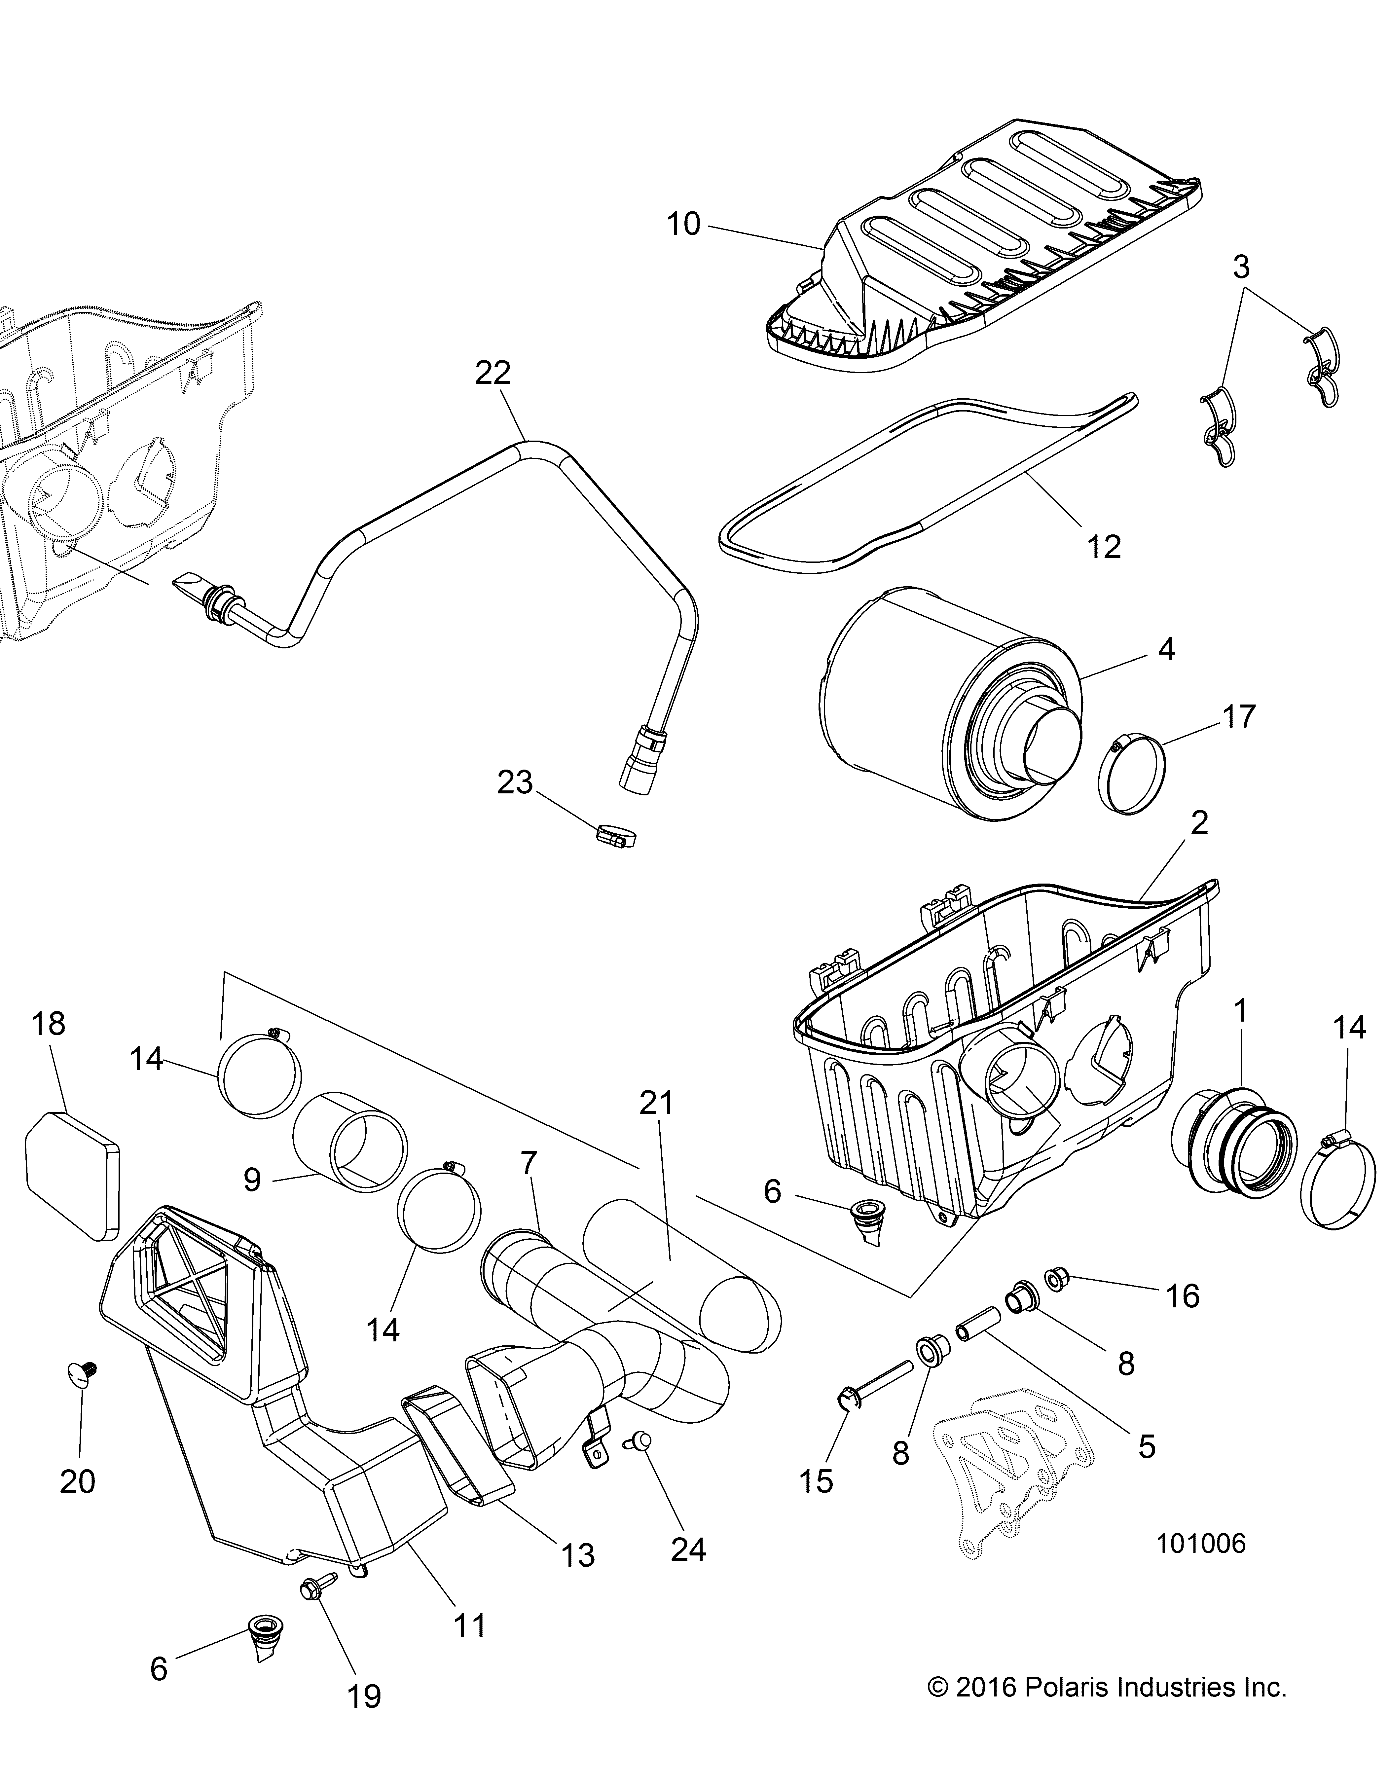 Part Number : 5414973 ENGINE BOOT INTAKE